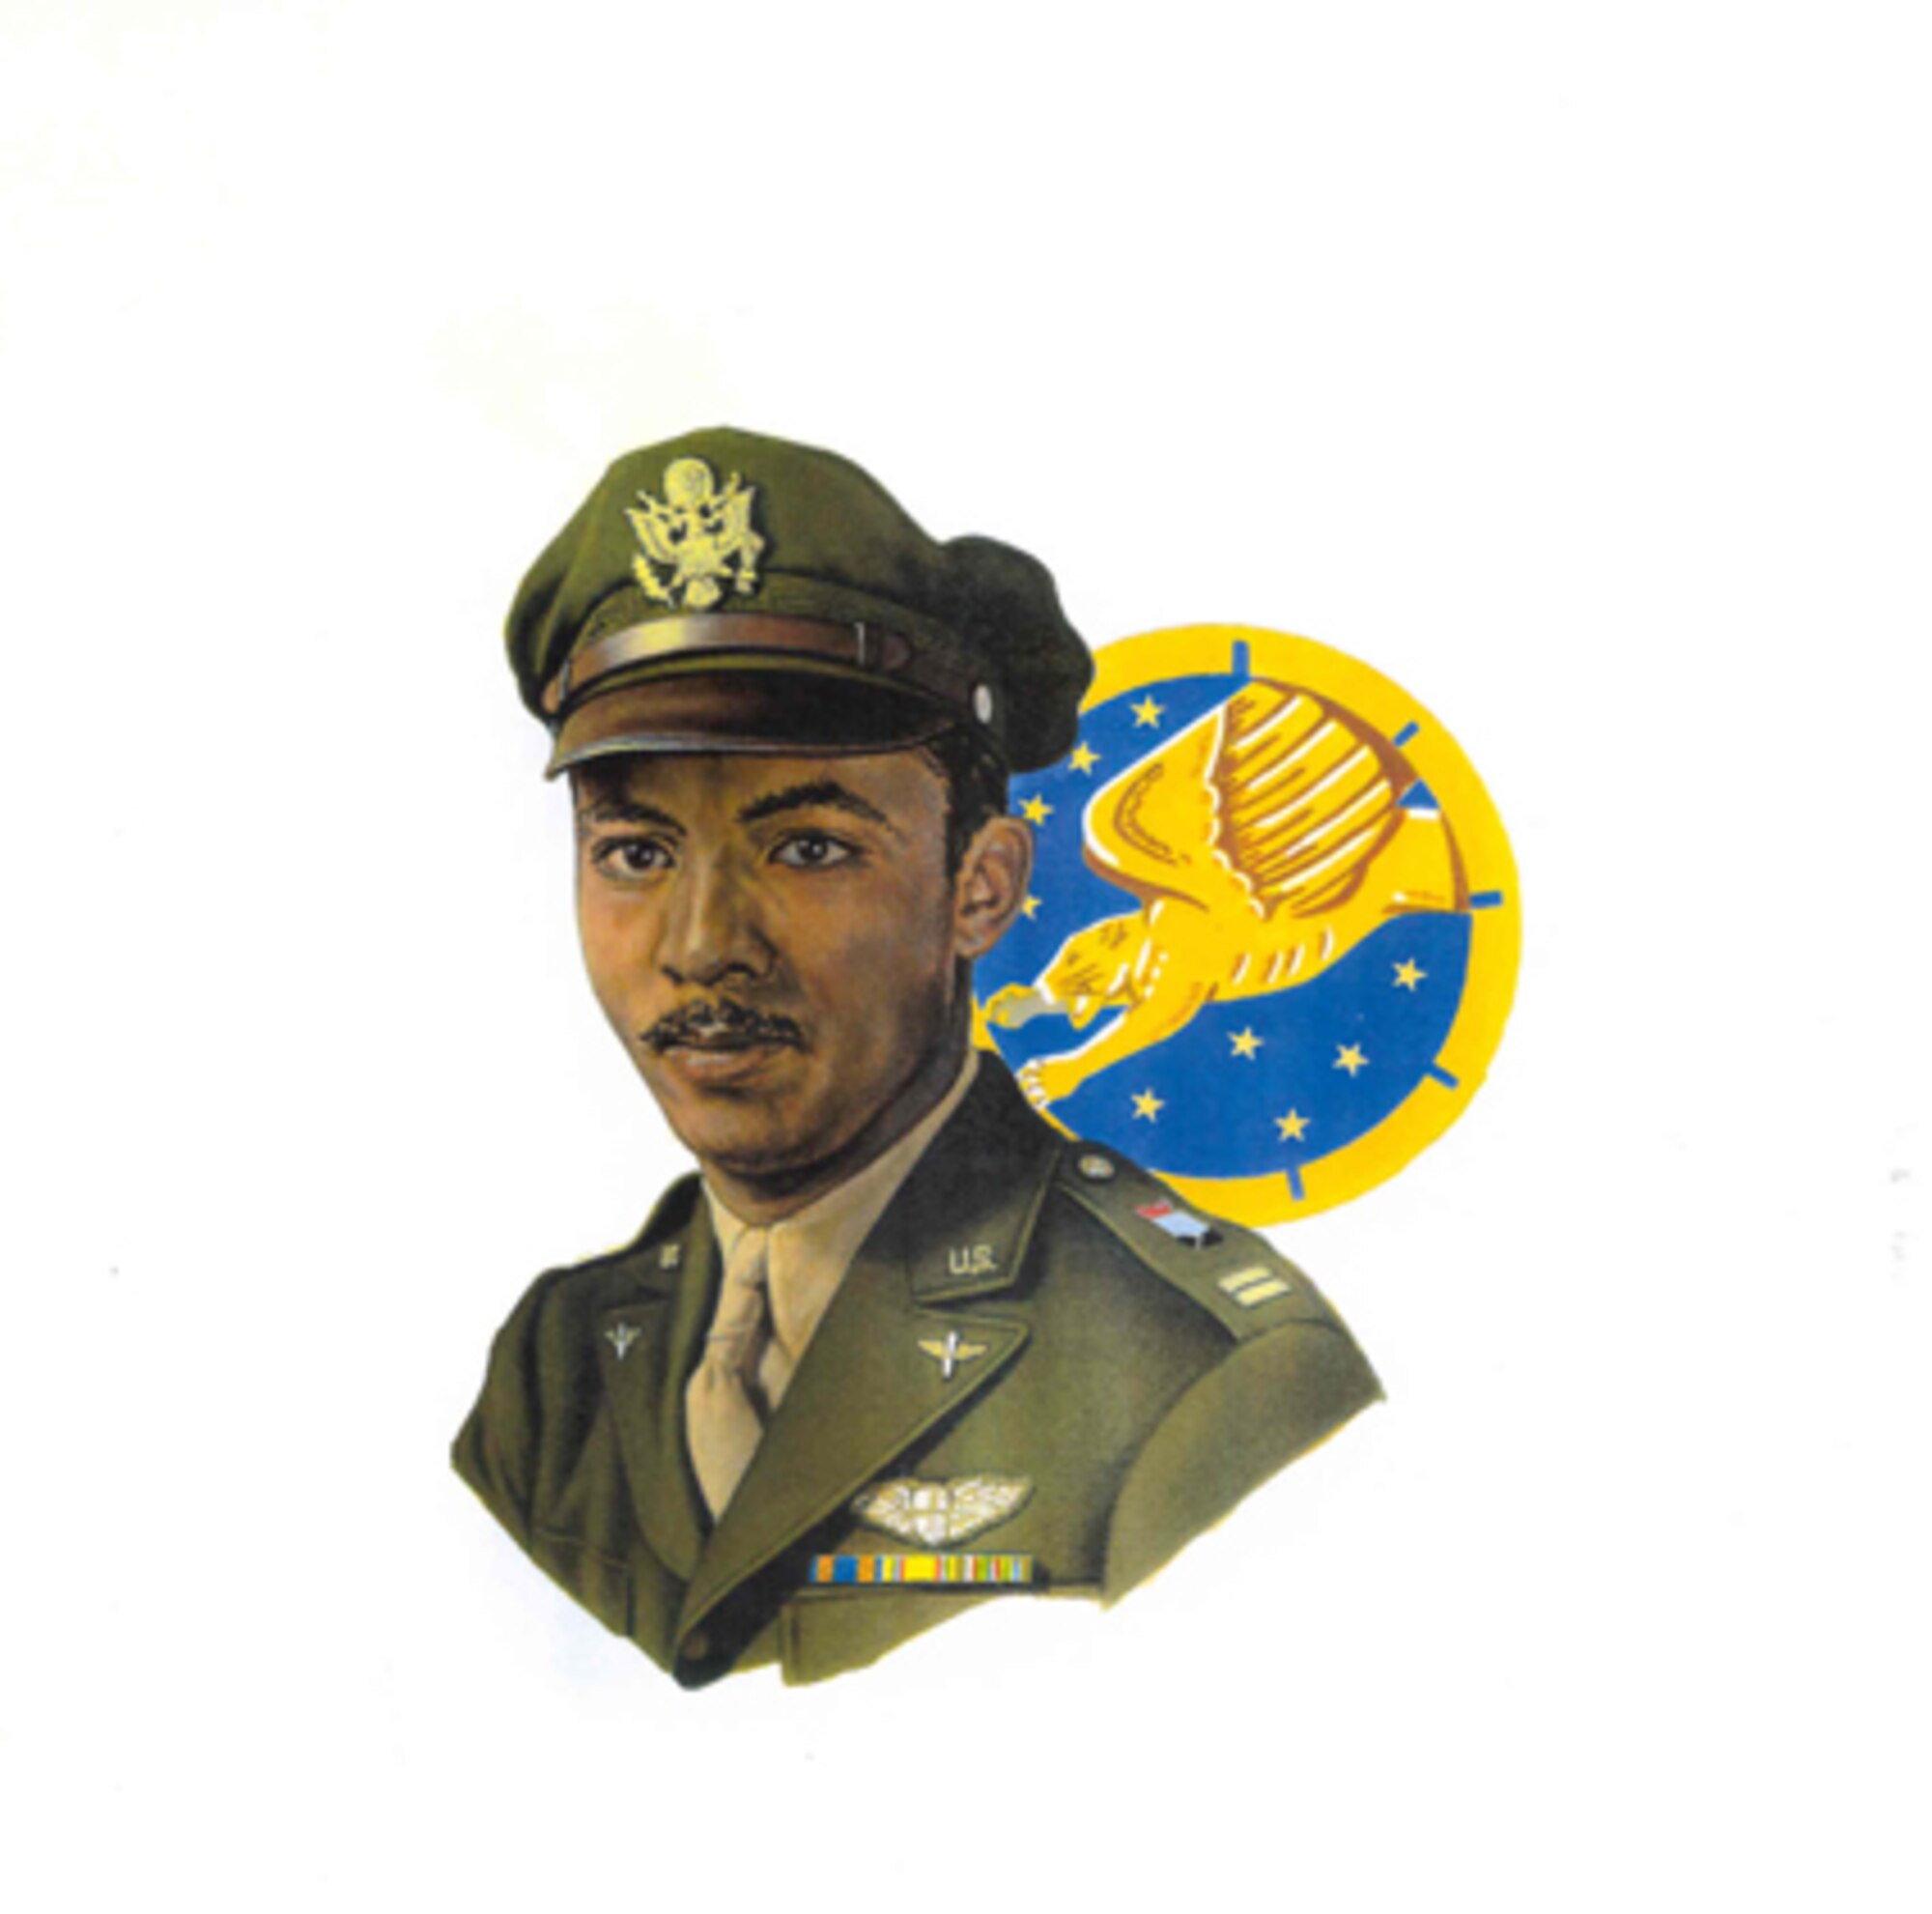 Retired Lt. Col. Herbert "Gene" Carter, shown in an artist's rendering, died Nov. 8, 2012. Carter was a member of the original cadre of the 99th Fighter Squadron, theTuskegee Airmen. Carter and his squadron broke the bonds of discrimination and the adversities of separatism with their achievements during World War II. (Illustration courtesy of  Air Command and Staff College Gathering of Eagles Foundation)